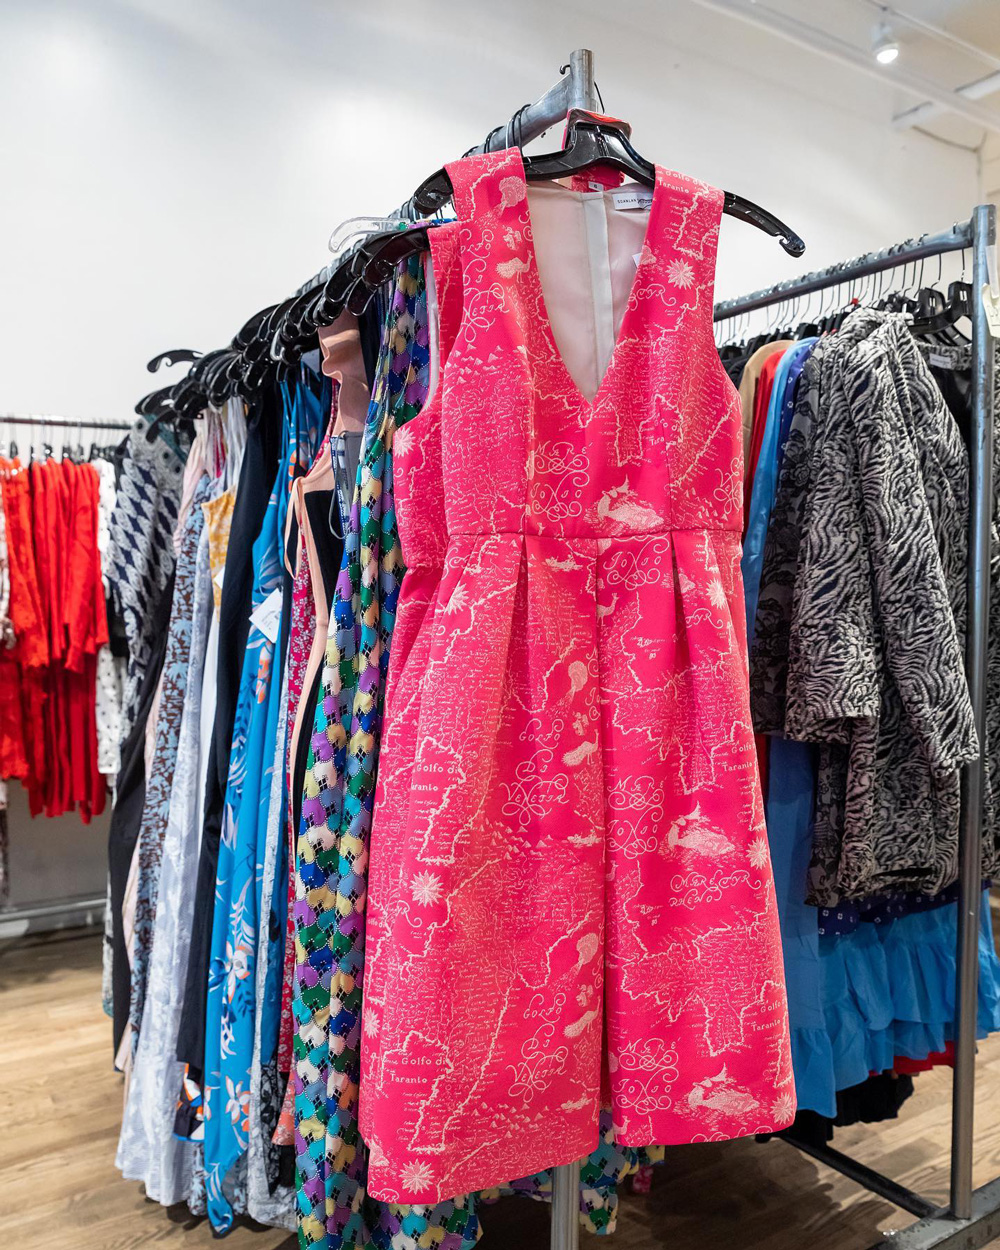 Scanlan Theodore, Jennifer Fisher, & Peserico Sample Sale in Images